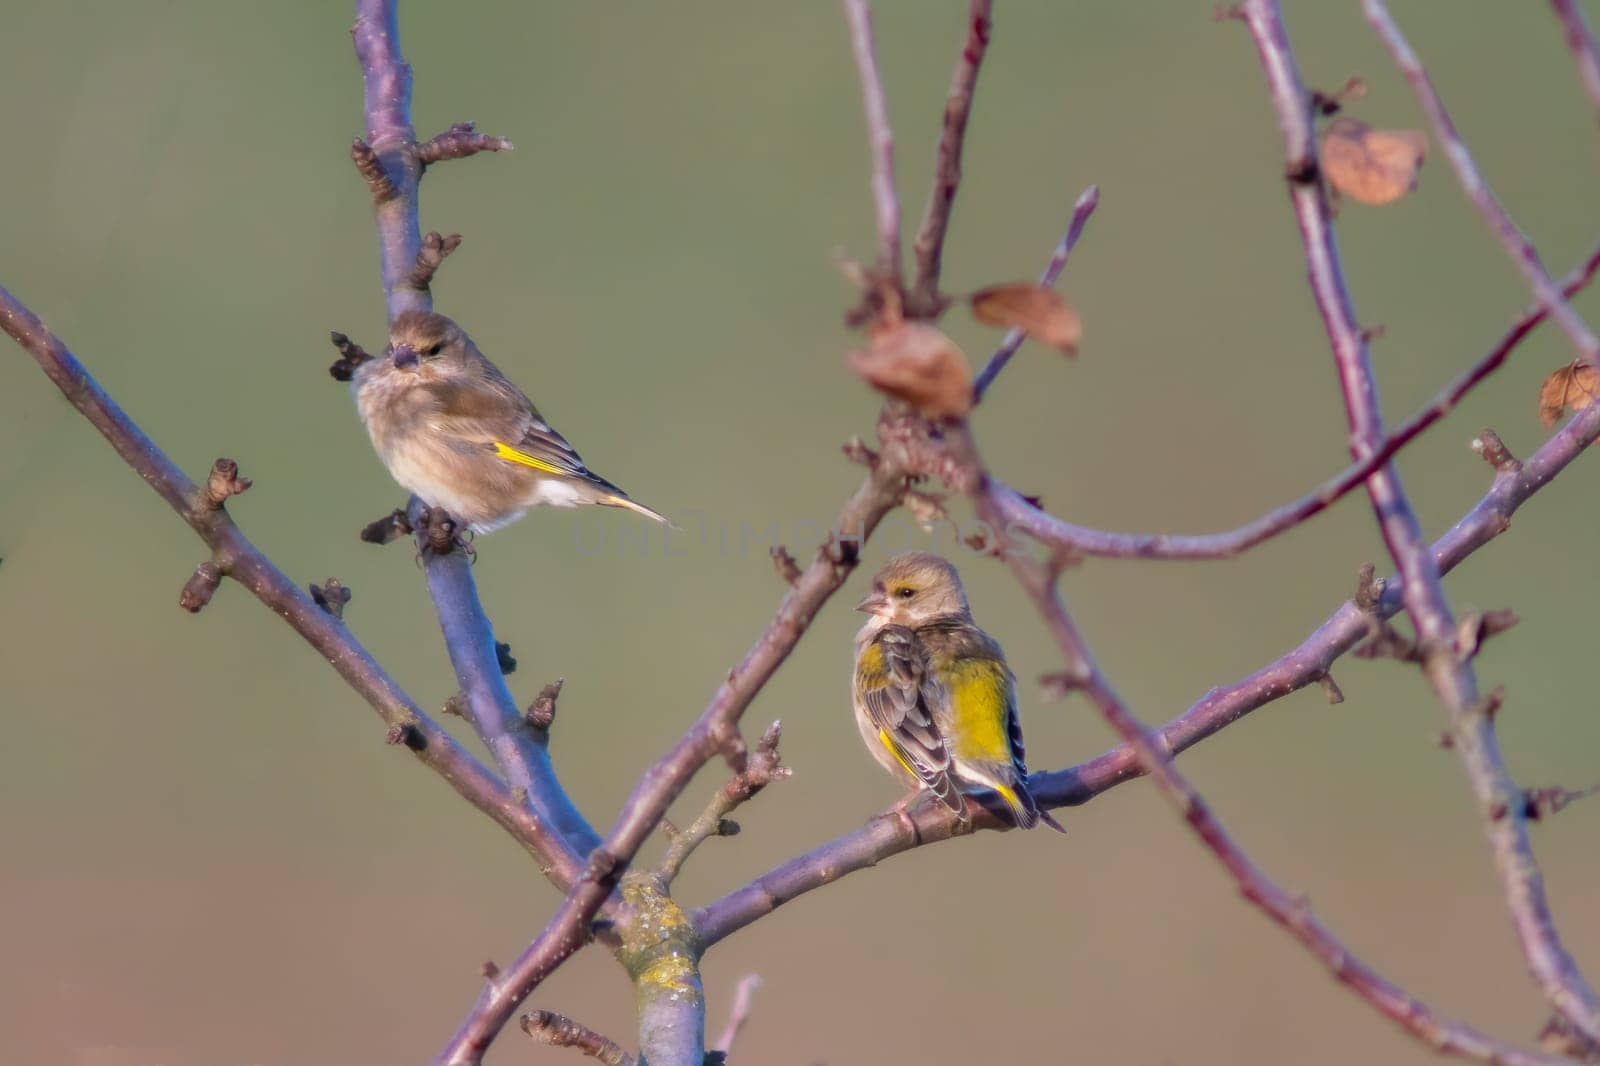 greenfinches sits on a branch